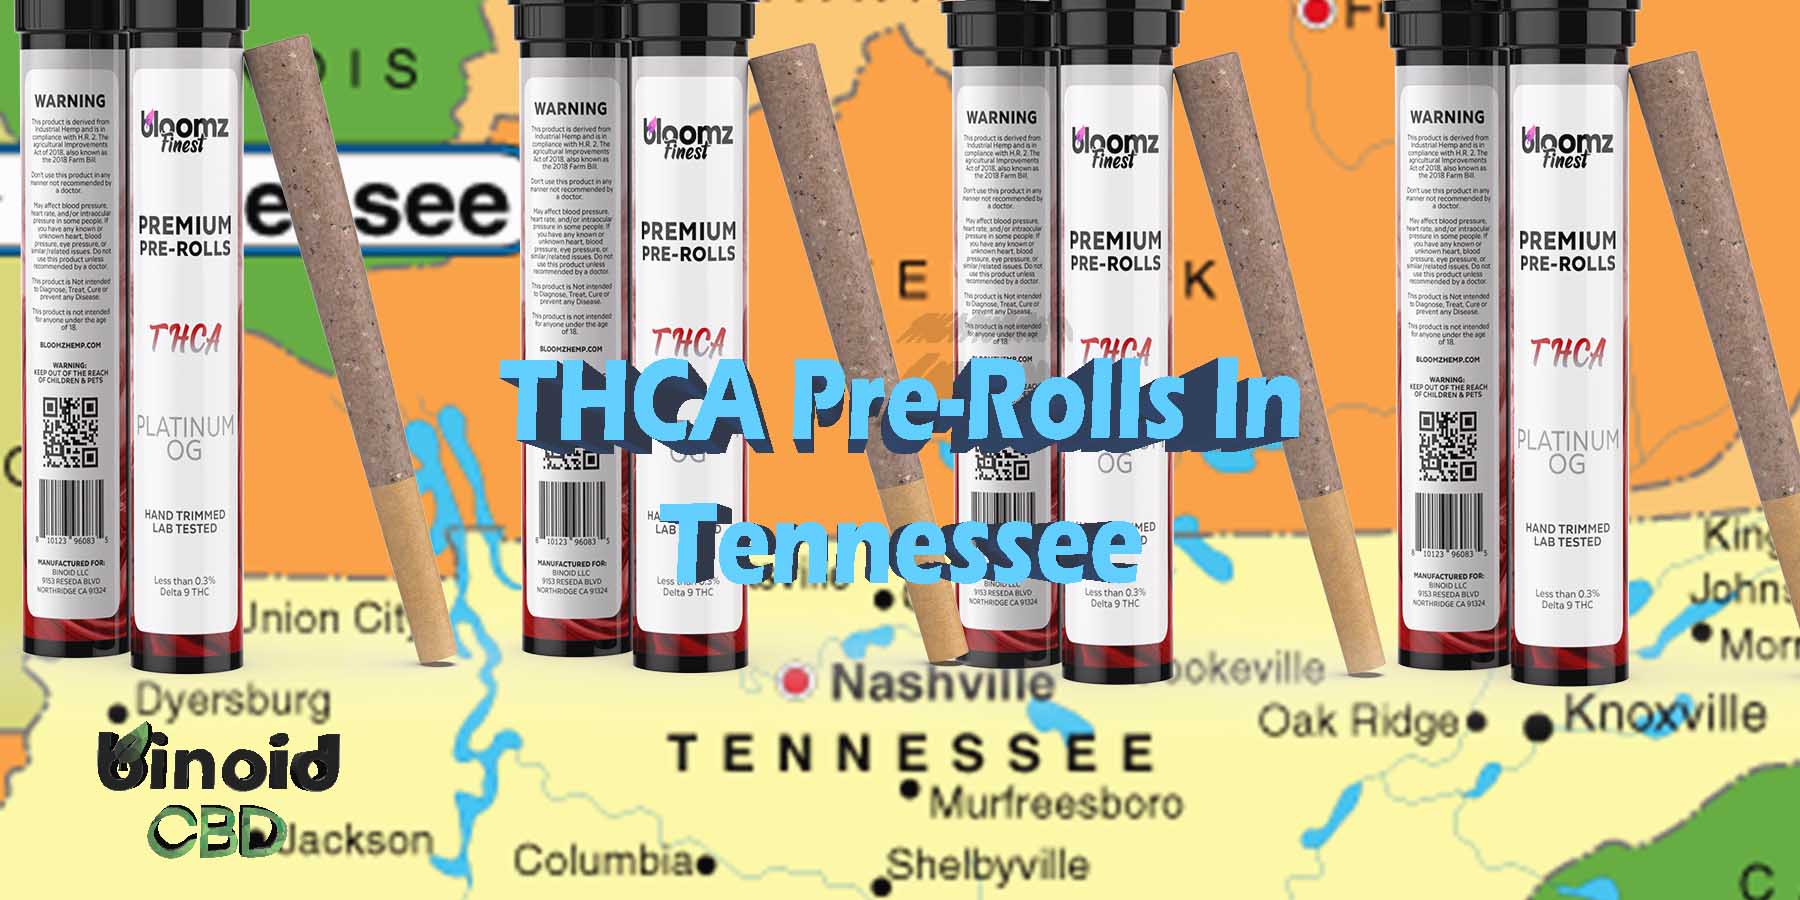 THCA Pre Rolls In Tennessee Hemp Flower Indica Where To Get Near Me Best Place Lowest Price Coupon Discount Strongest Brand Bloomz